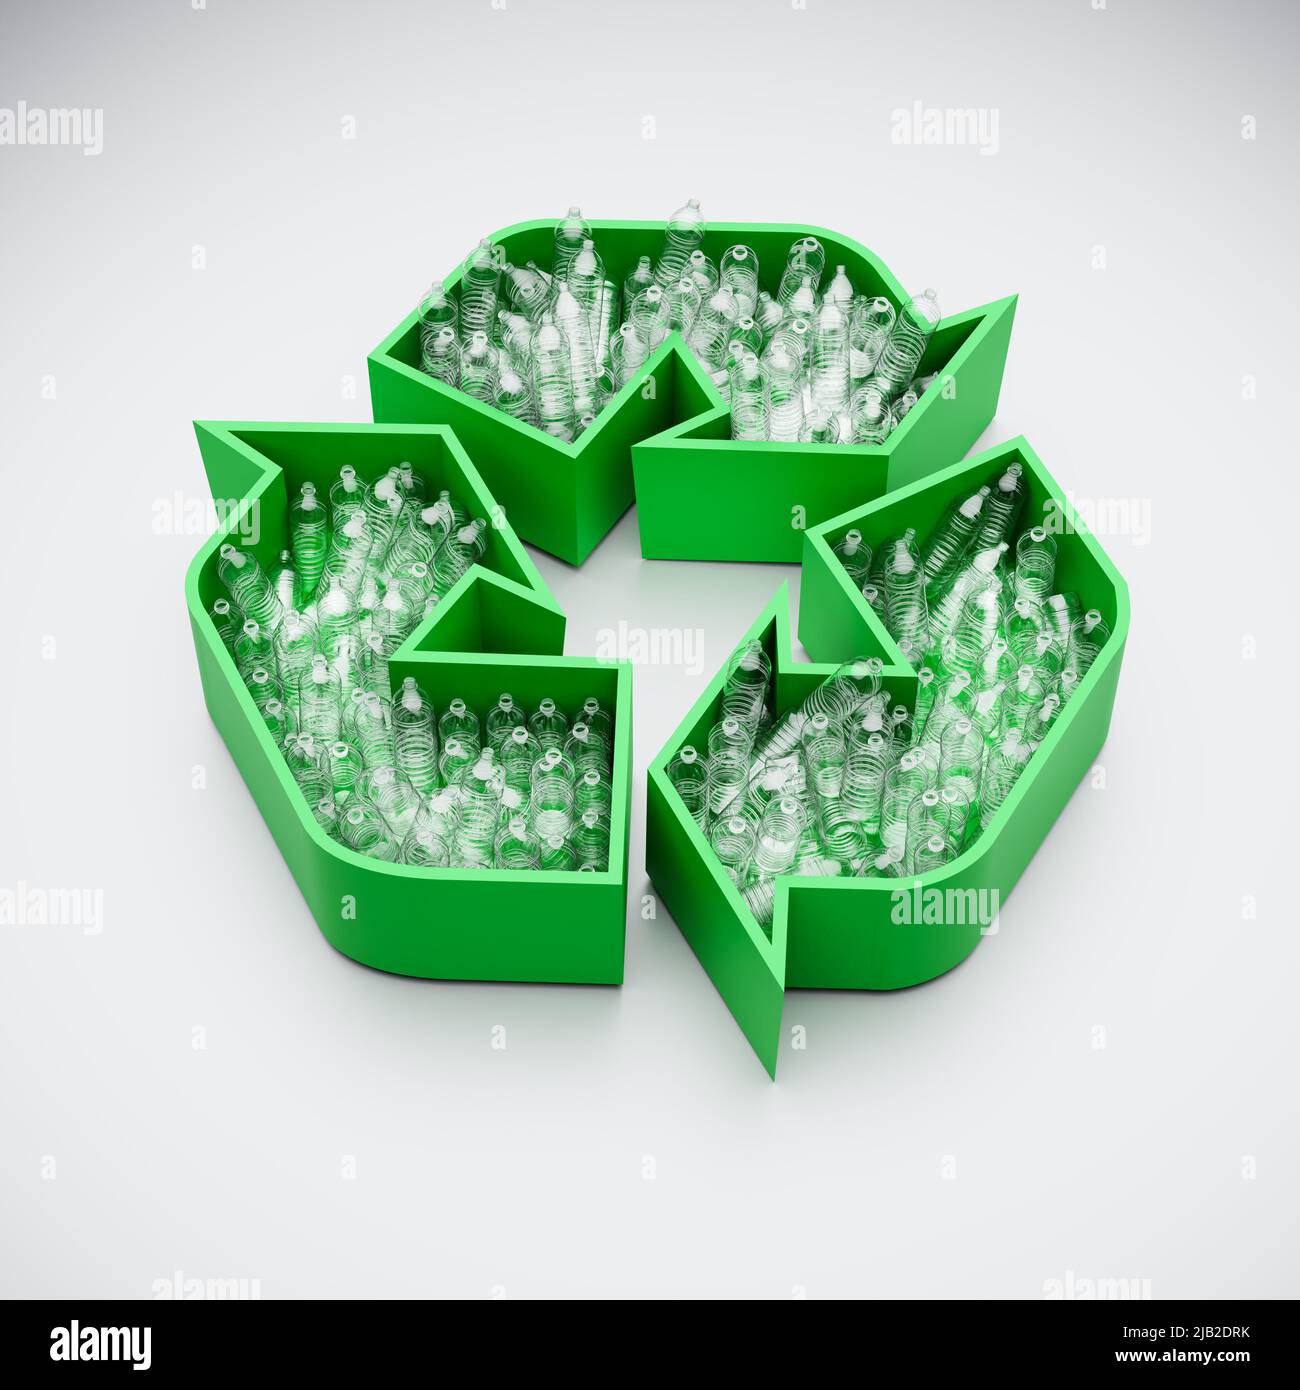 Empty plastic water bottles in a recycling logo on grey background. Concept for recycling of plastic waste. Stock Photo